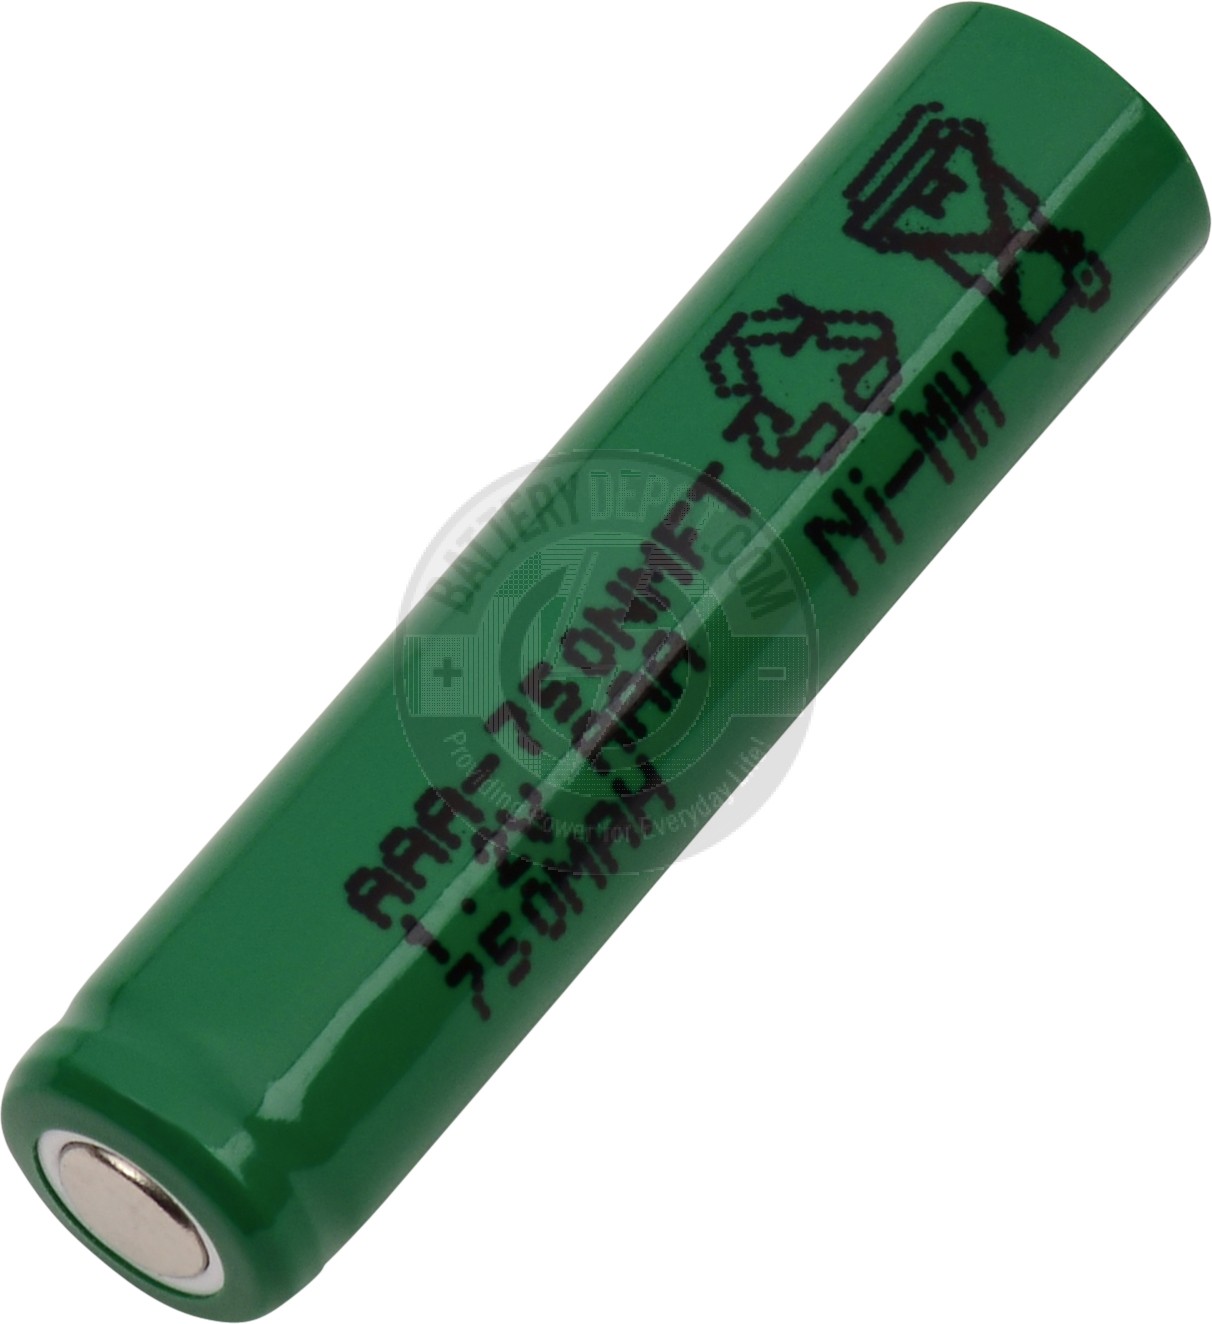 Rechargeable AAA flat top battery